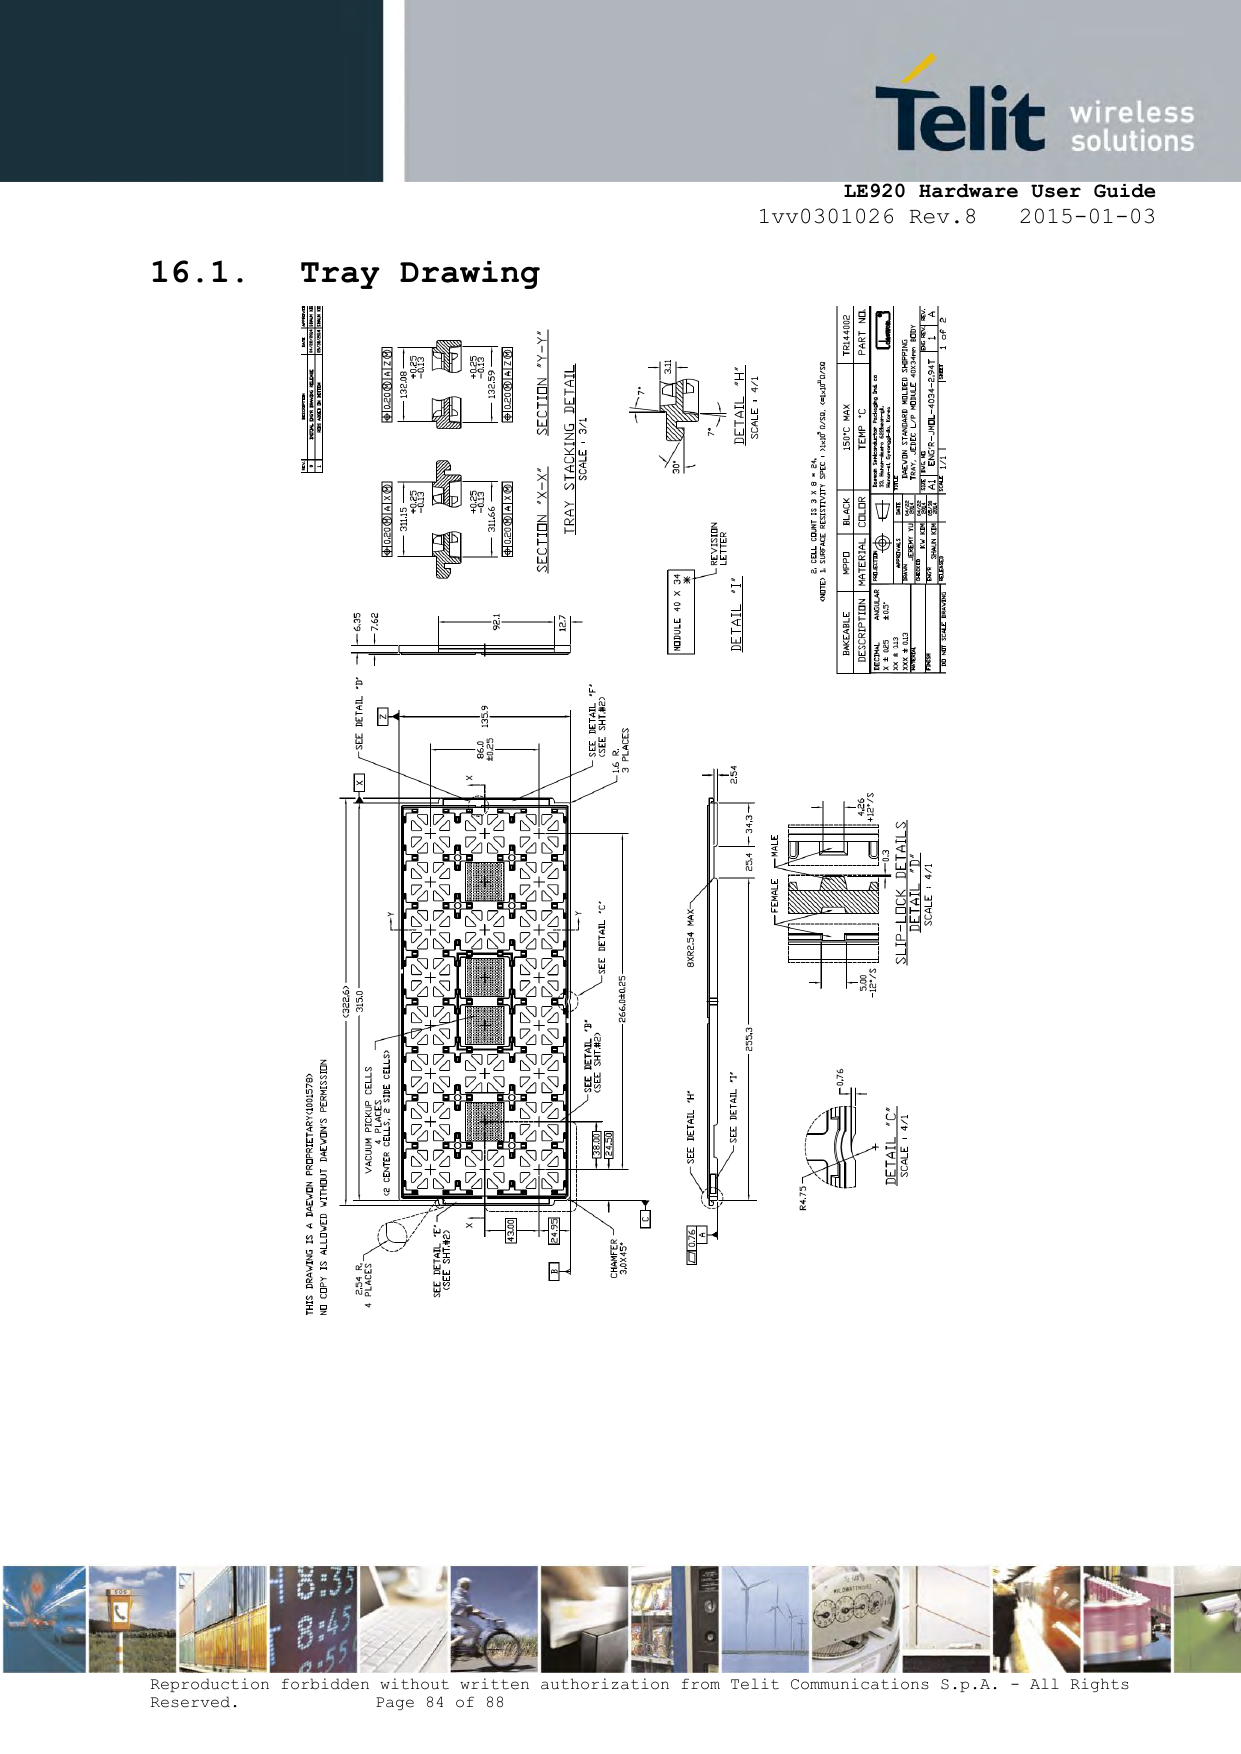     LE920 Hardware User Guide 1vv0301026 Rev.8   2015-01-03 Reproduction forbidden without written authorization from Telit Communications S.p.A. - All Rights Reserved.    Page 84 of 88  16.1. Tray Drawing    